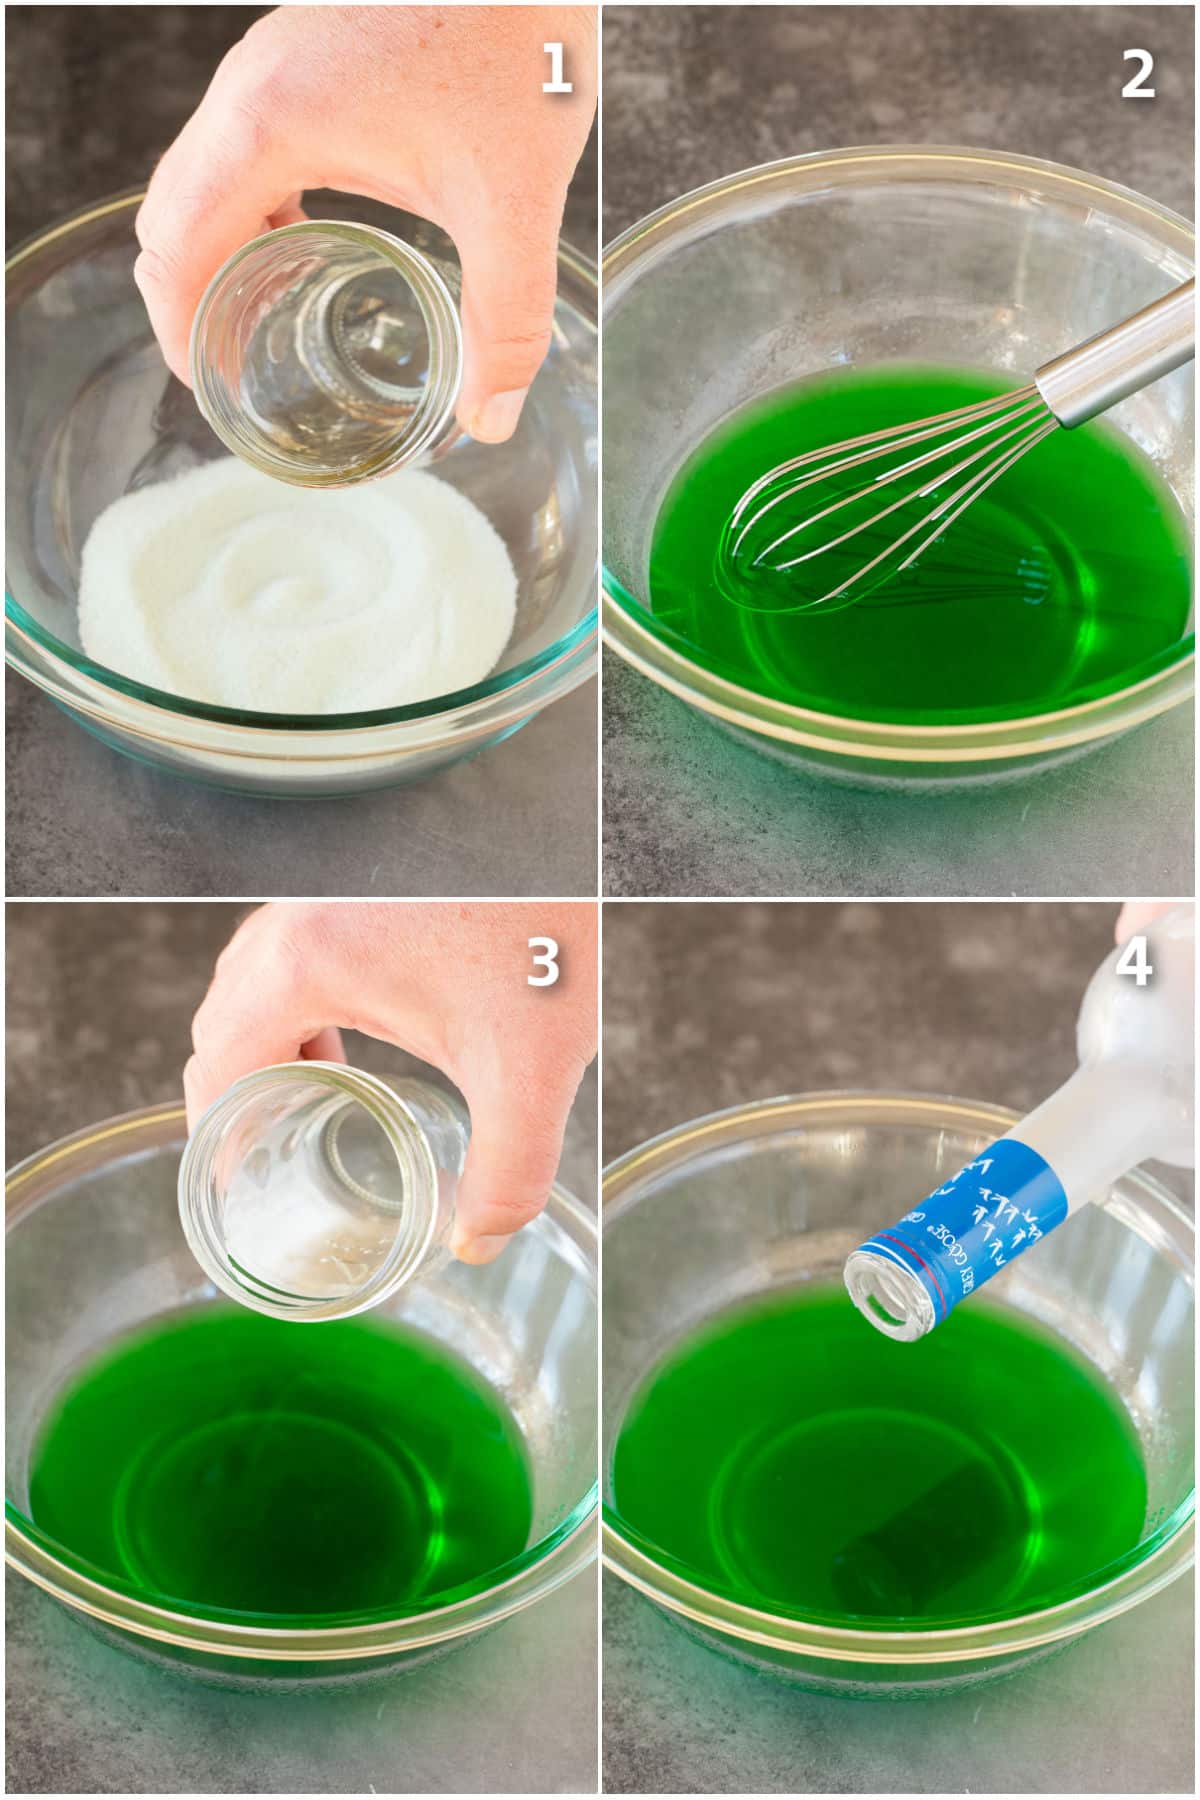 Step by step process shots showing how to make vodka Jello.